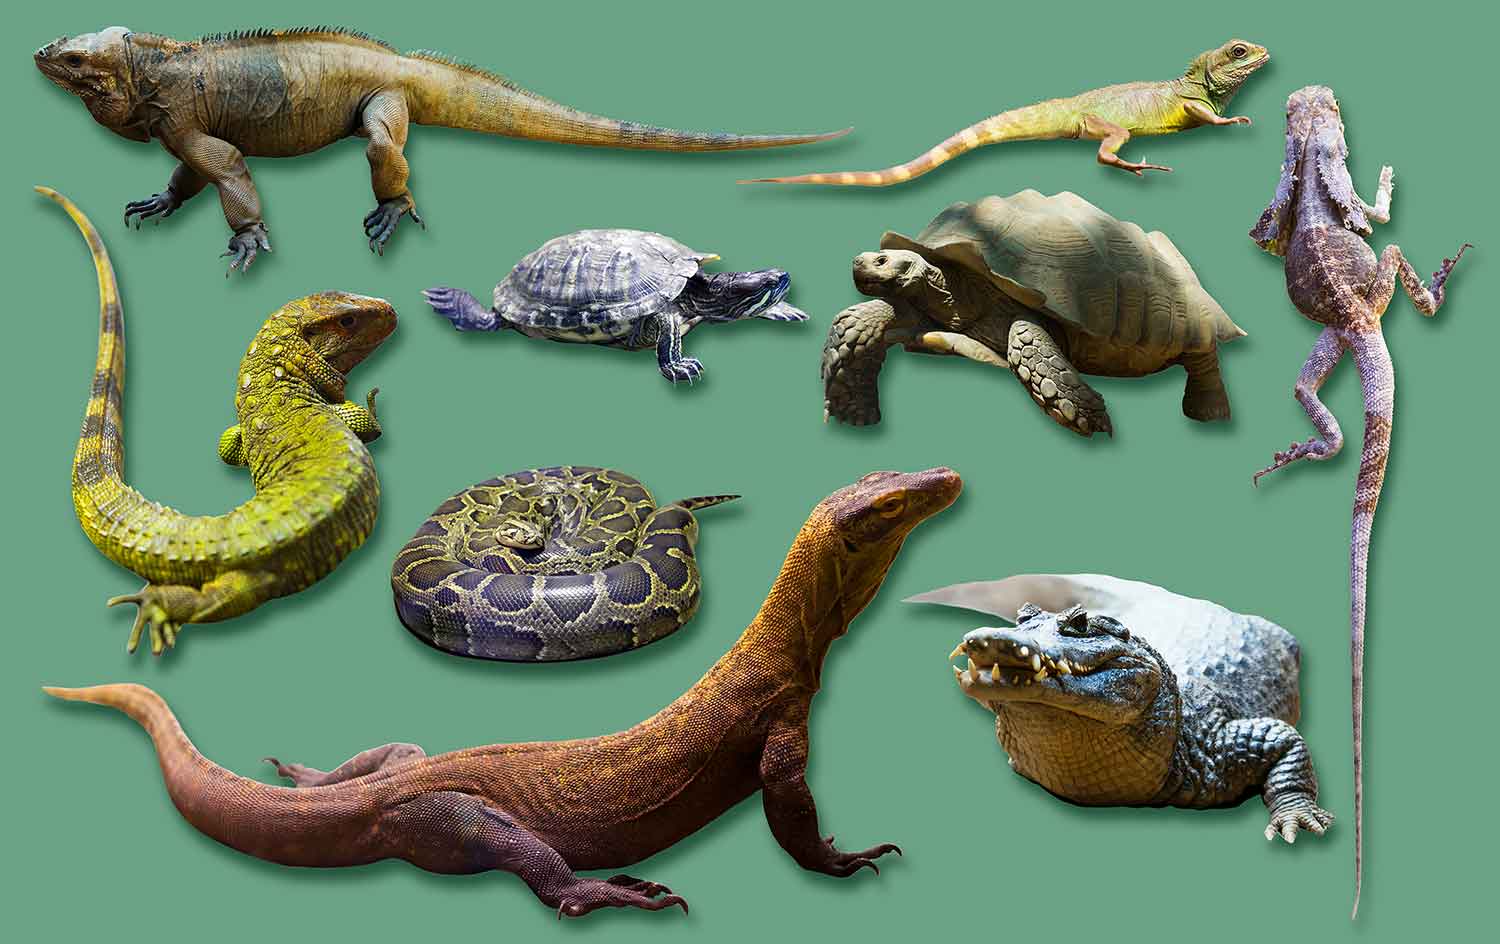 Composite showing a snake, lizards, turtles, and a crocodile.